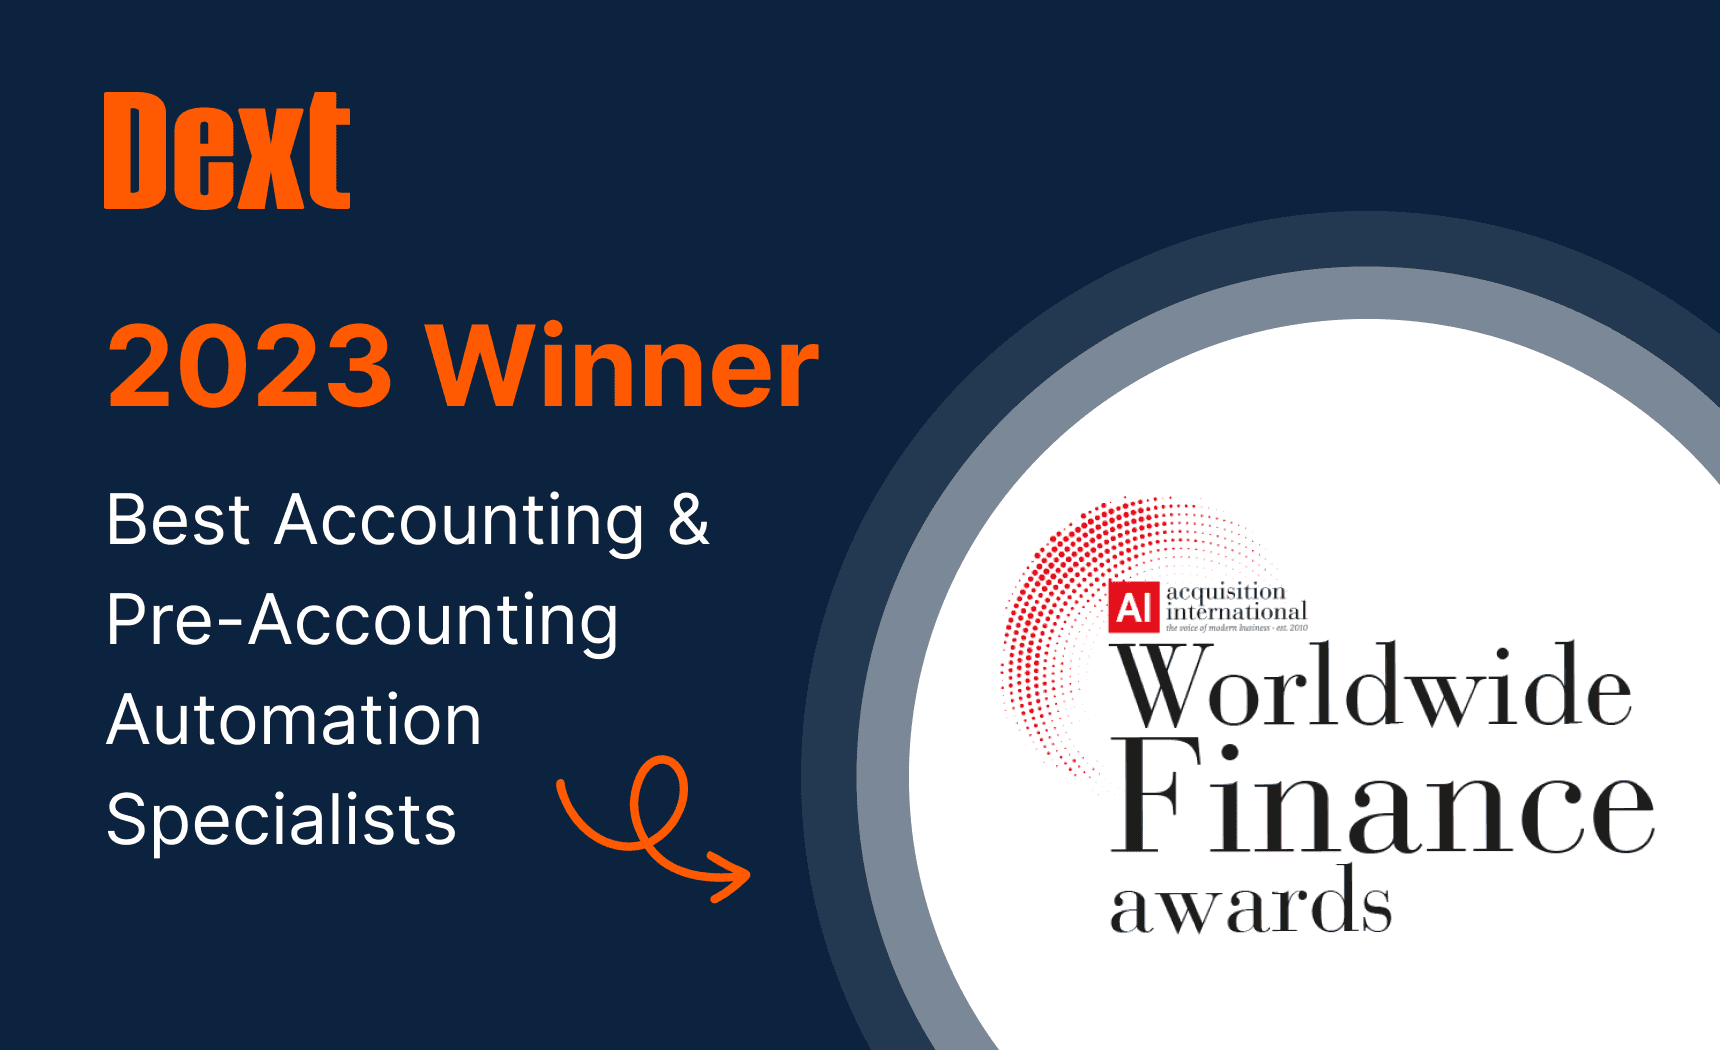 Dext recognised as Best Accounting & Pre-Accounting Automation Specialists at the Worldwide Finance Awards 2023